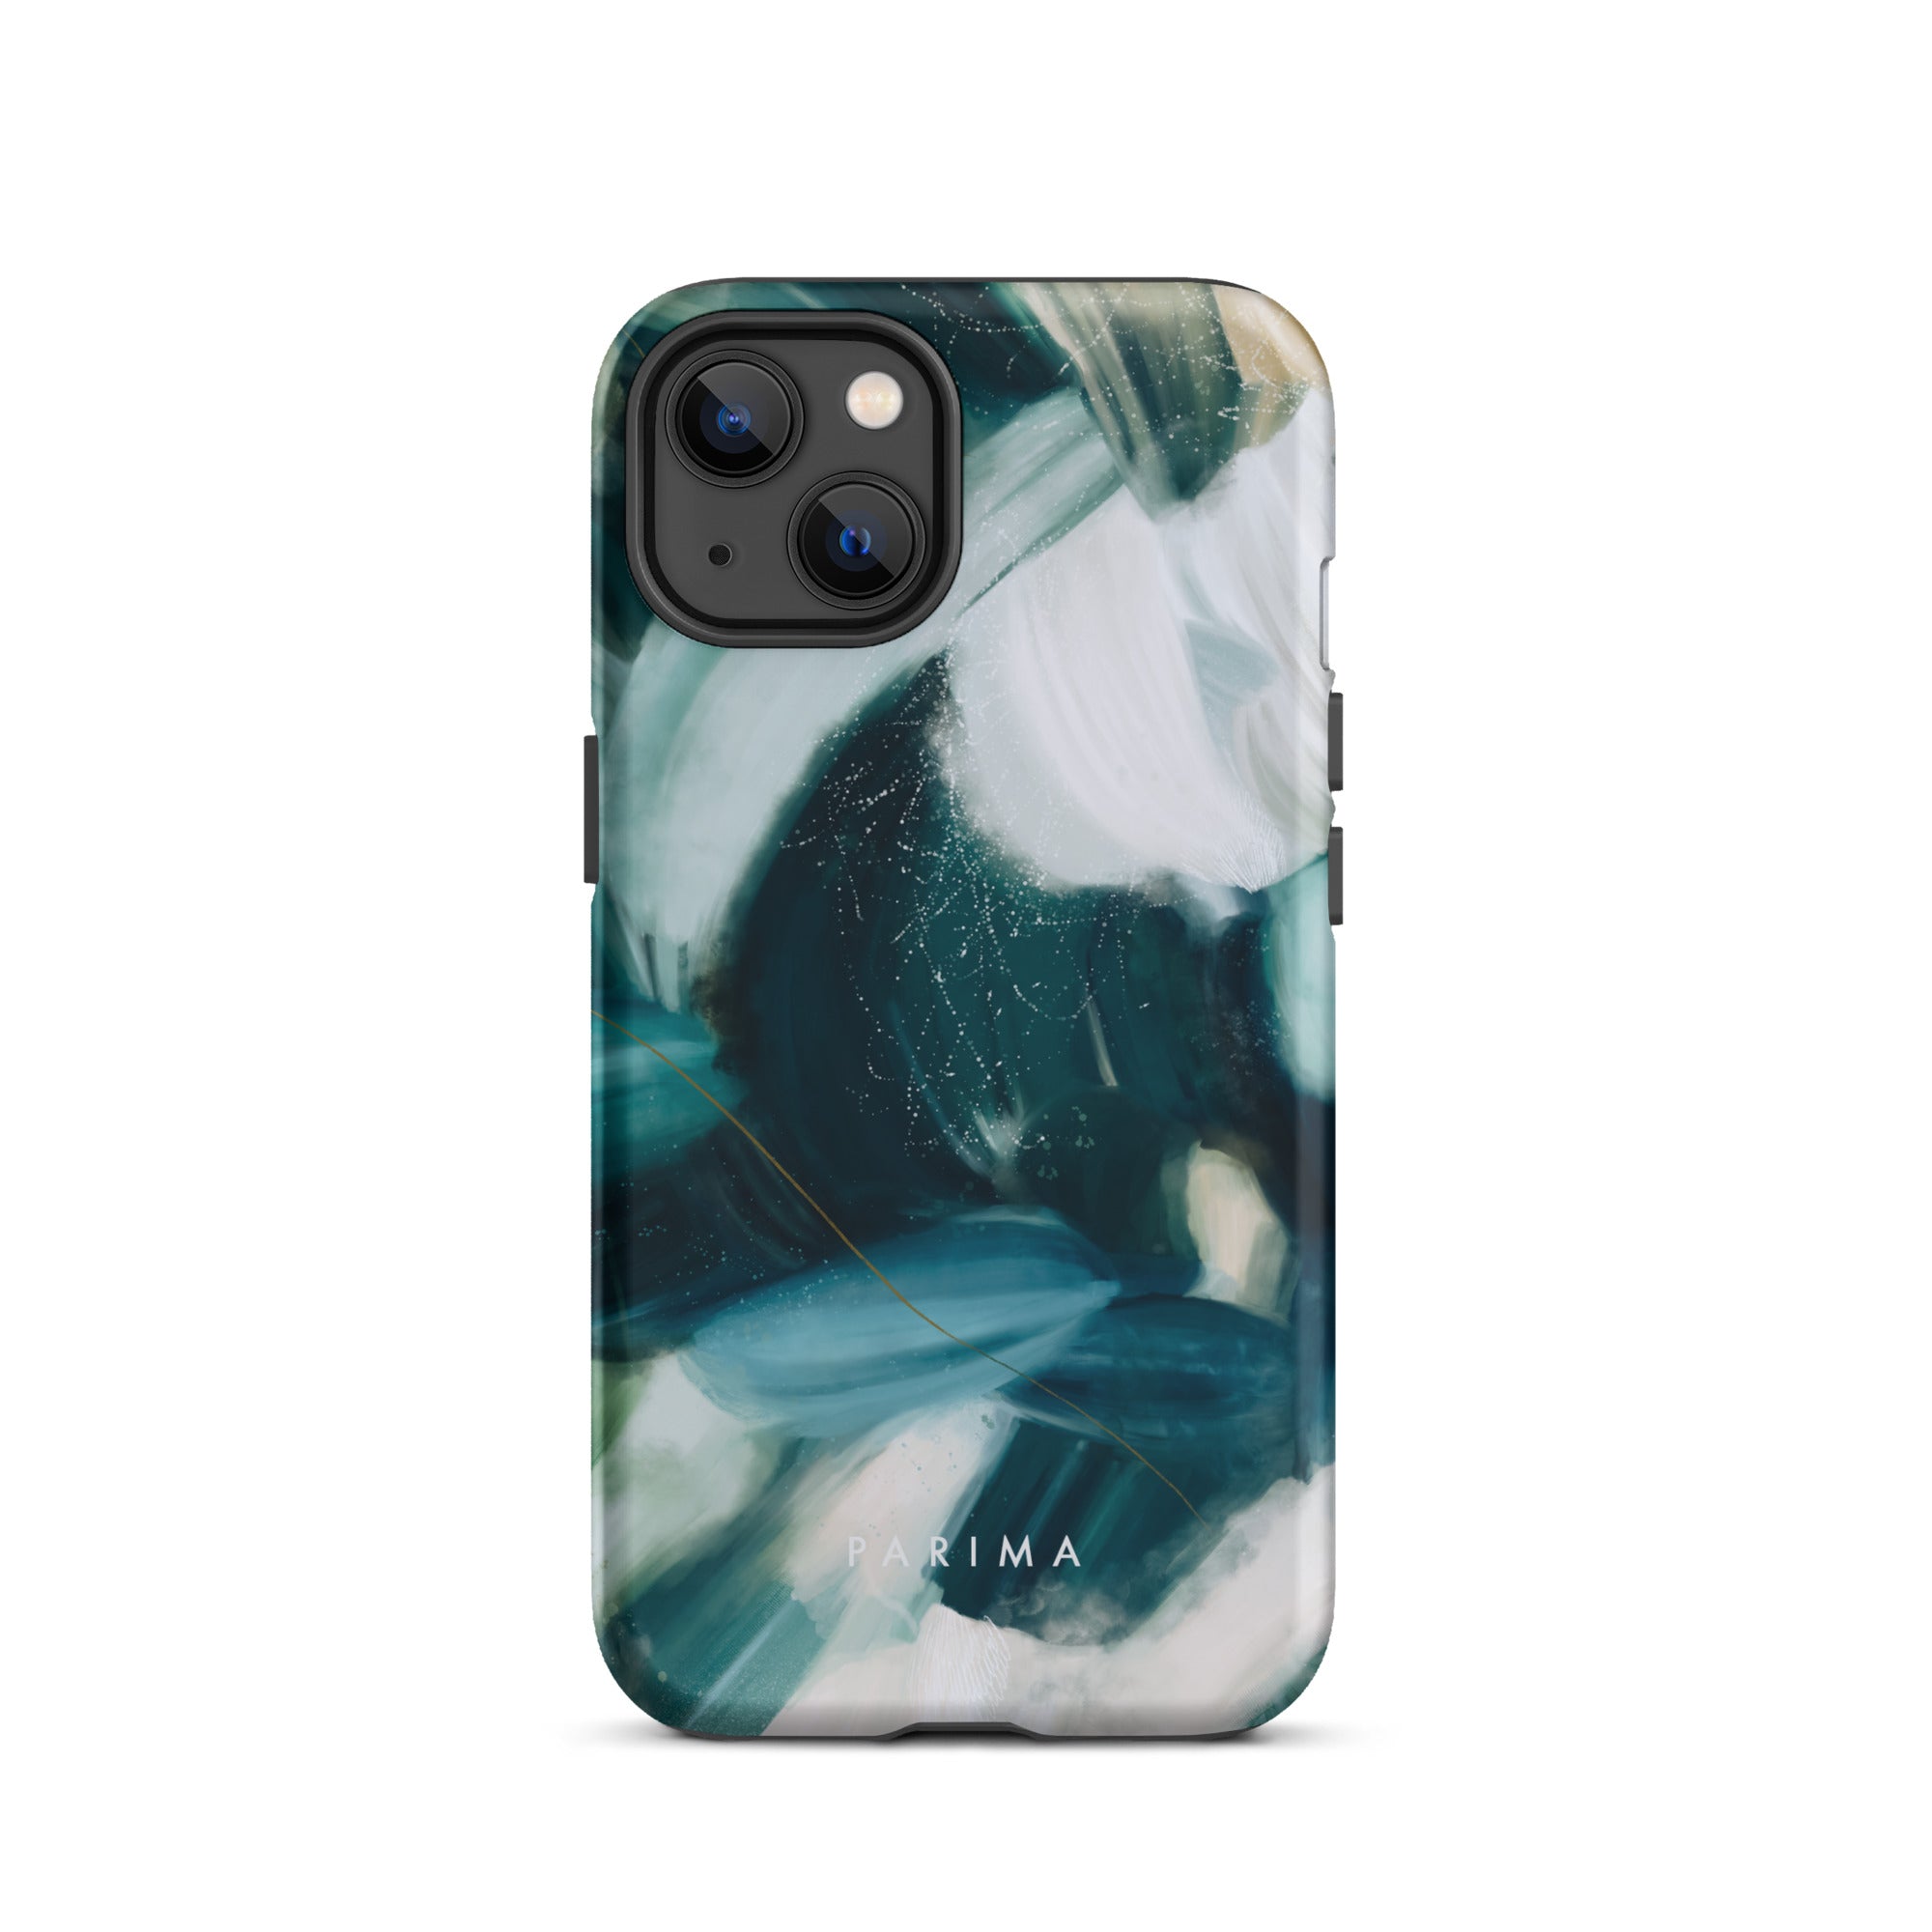 Caspian, green and blue abstract art - iPhone 13 tough case by Parima Studio